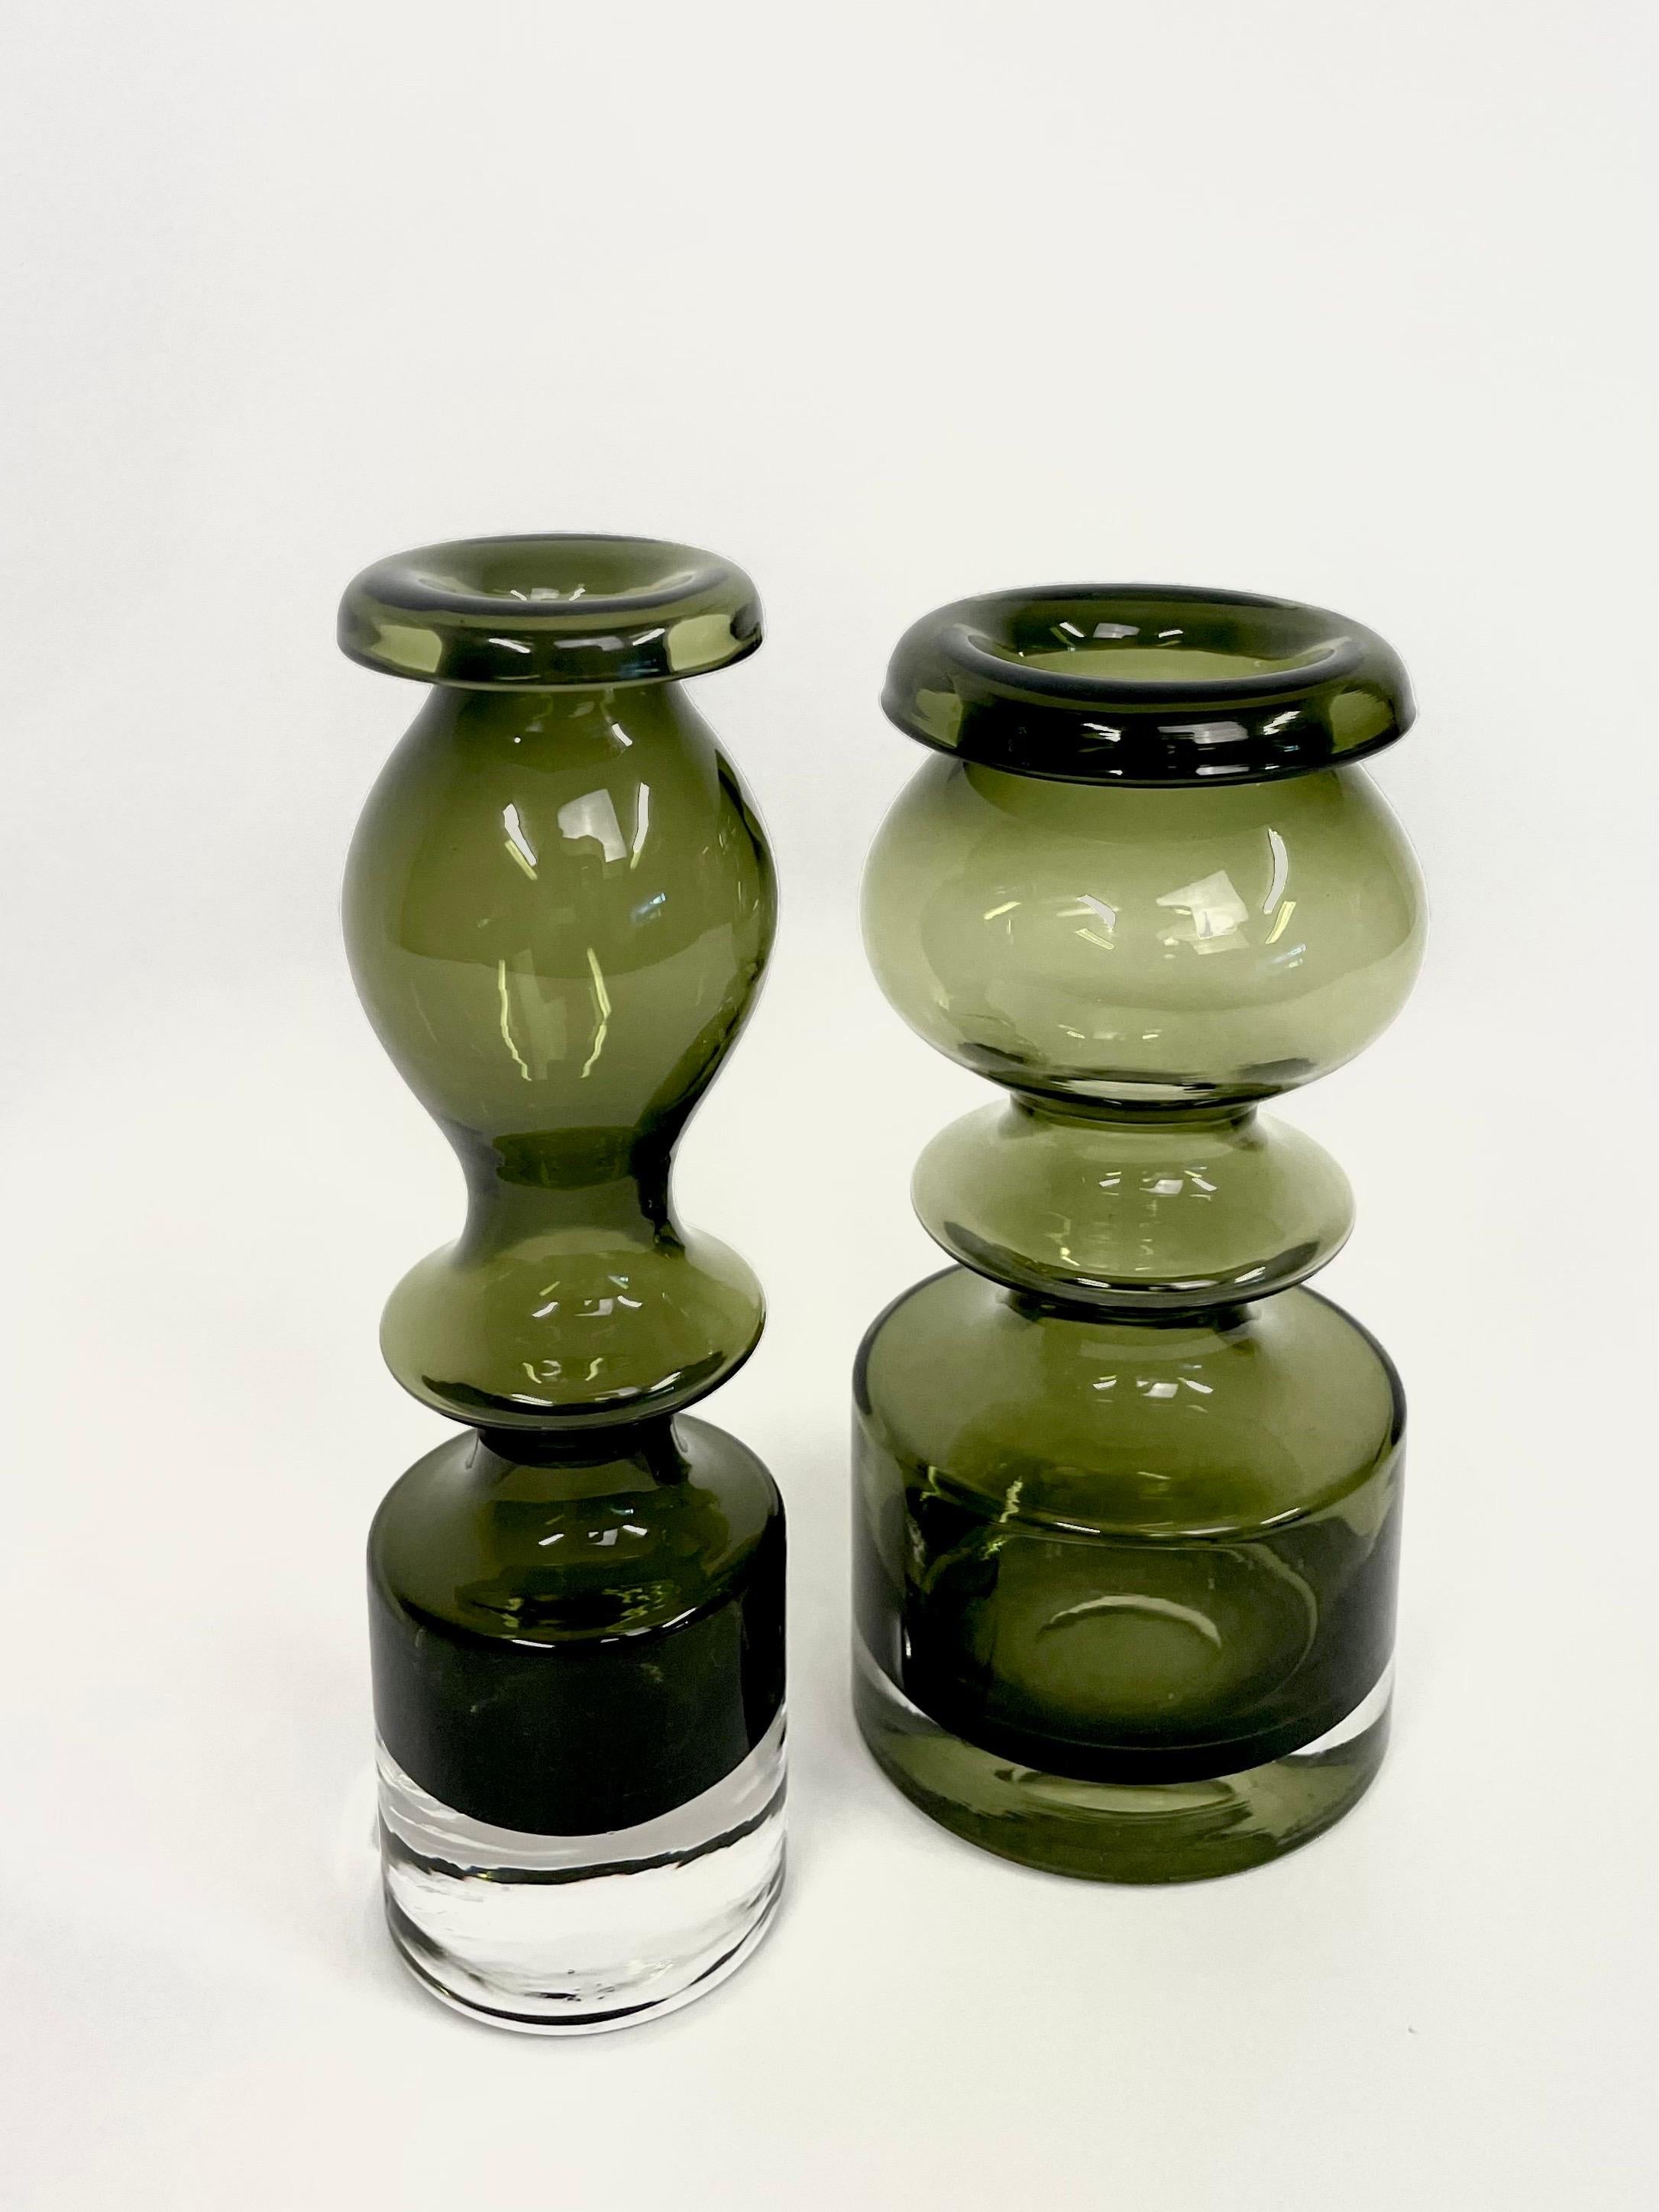 This is a Finnish set of two pieces by Nanny Still named Pompadour. 
It comes in the quiet rare color olive green. The two models, 1945 and 1405,  of the Pompadour series are designed in an elegant shape. This particular model 1405 has a folded,